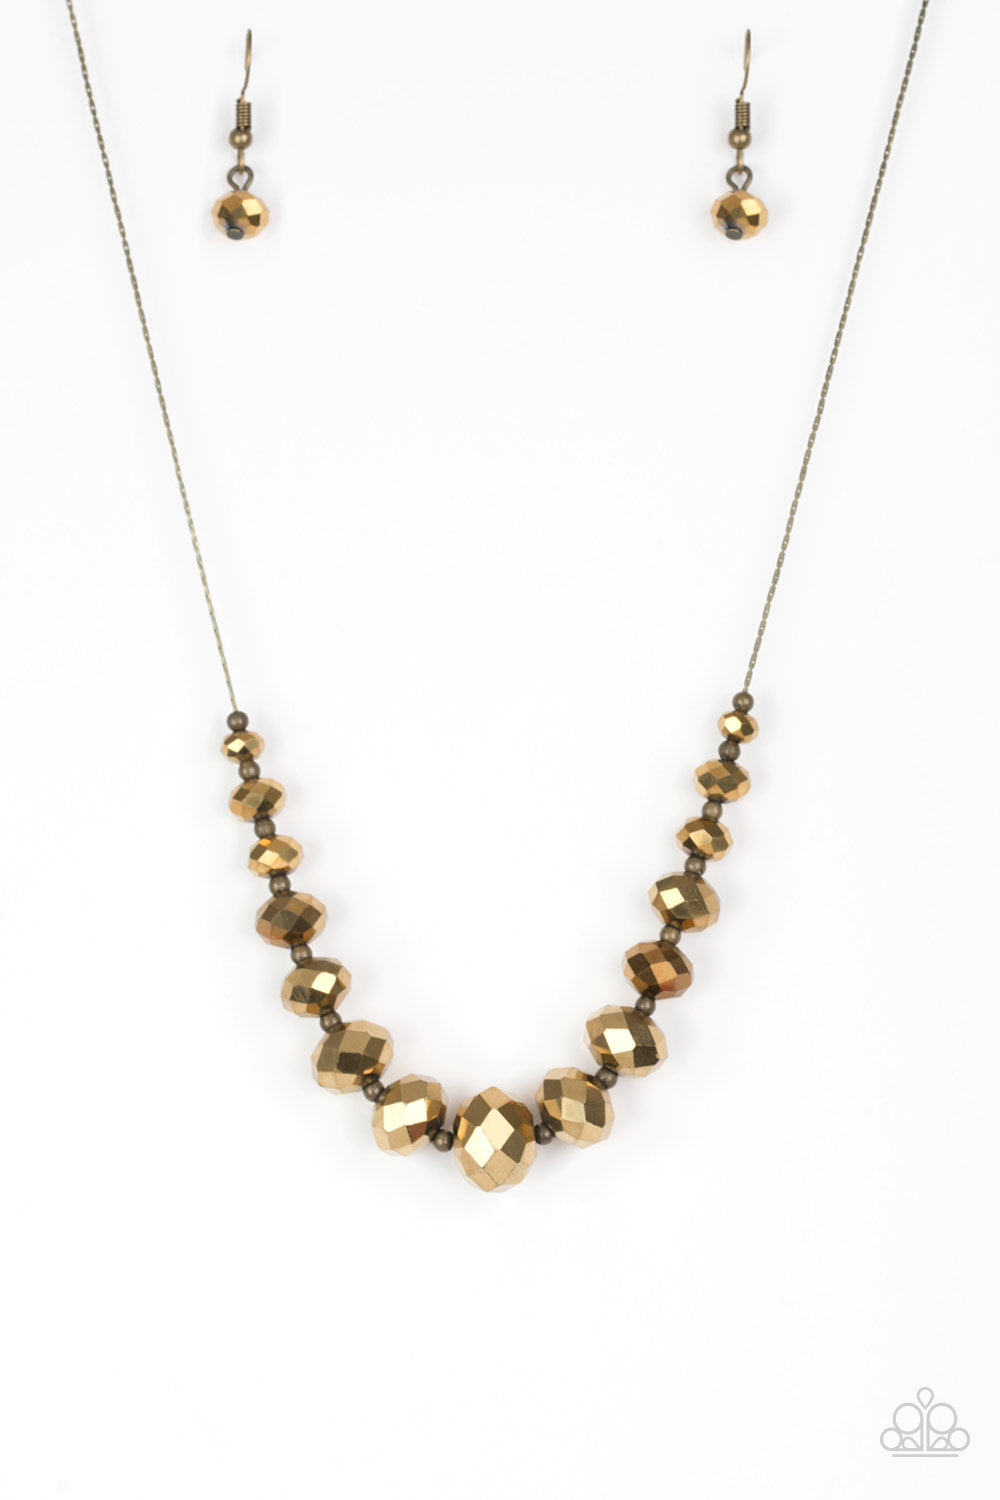 ♥ - ♥ Paparazzi – Crystal LisaAbercrombie Carriages Necklace Brass